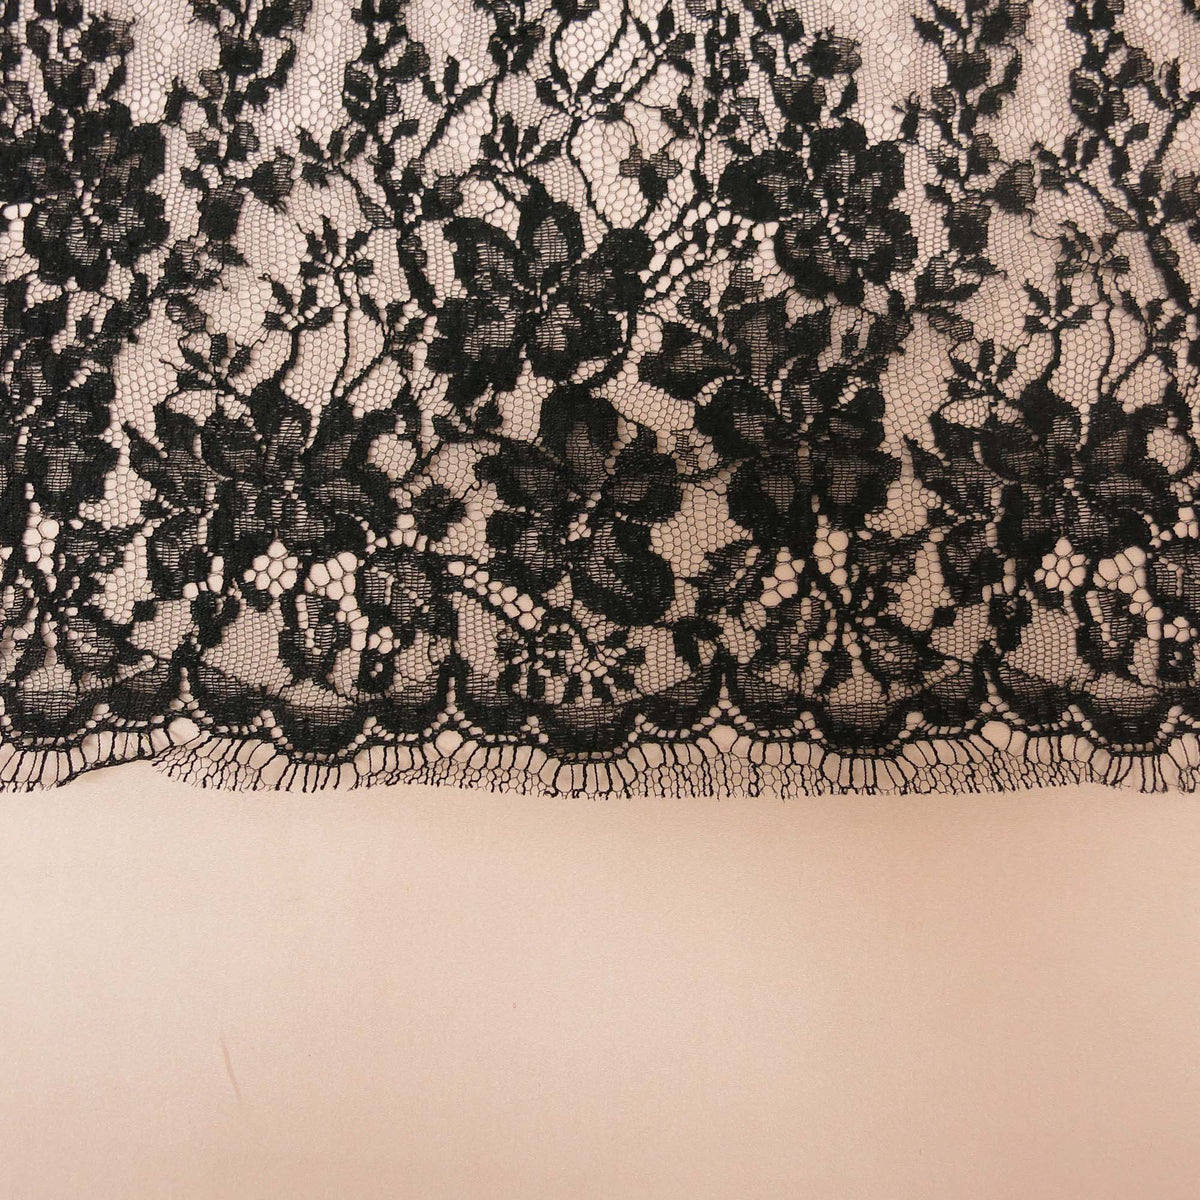 Solstiss Lace – A Fabric Place